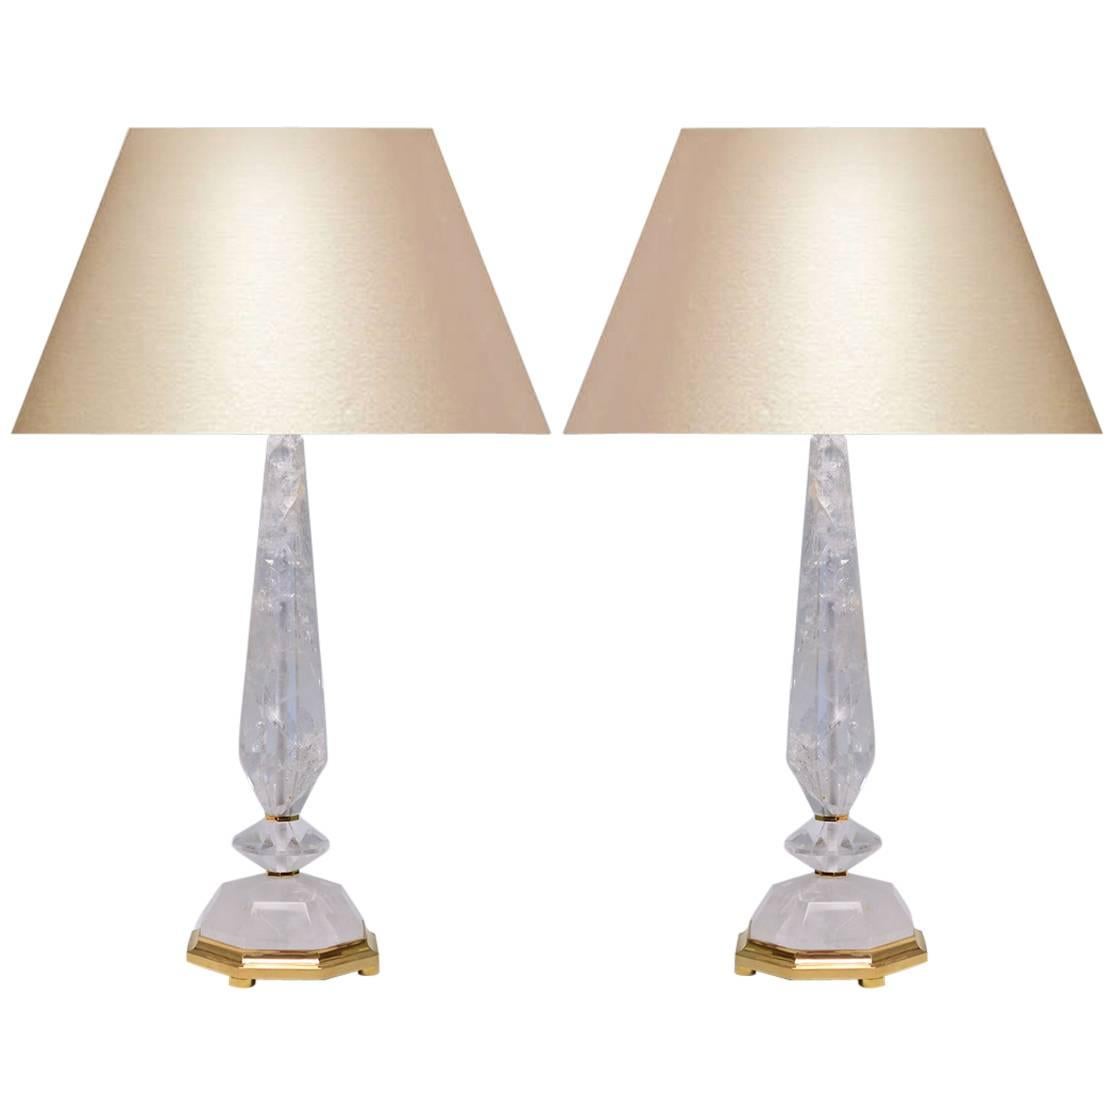 Pair of Prism and Diamond Form Rock Crystal Quartz Lamps